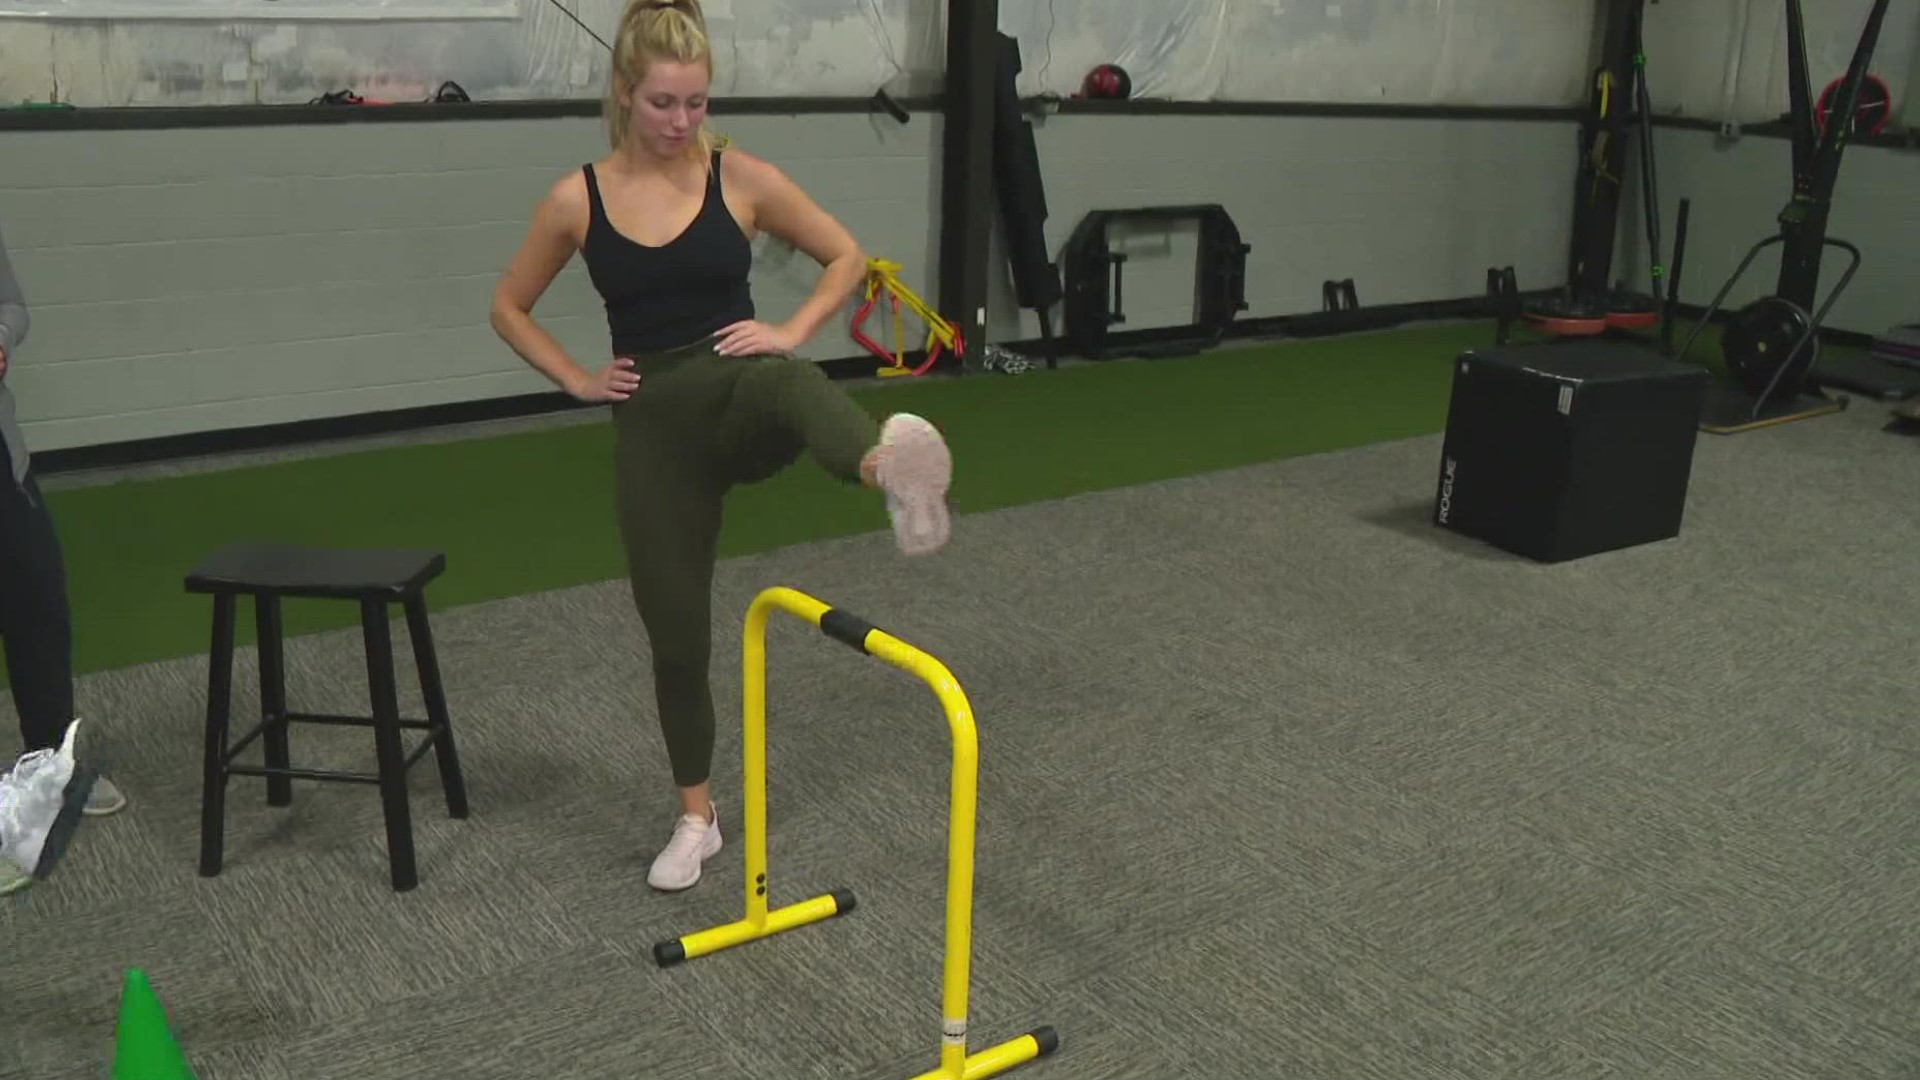 To keep your hips flexible, bring your leg up and over a chair. Do this 10-12 times for each leg every other day to help get your mobility back.